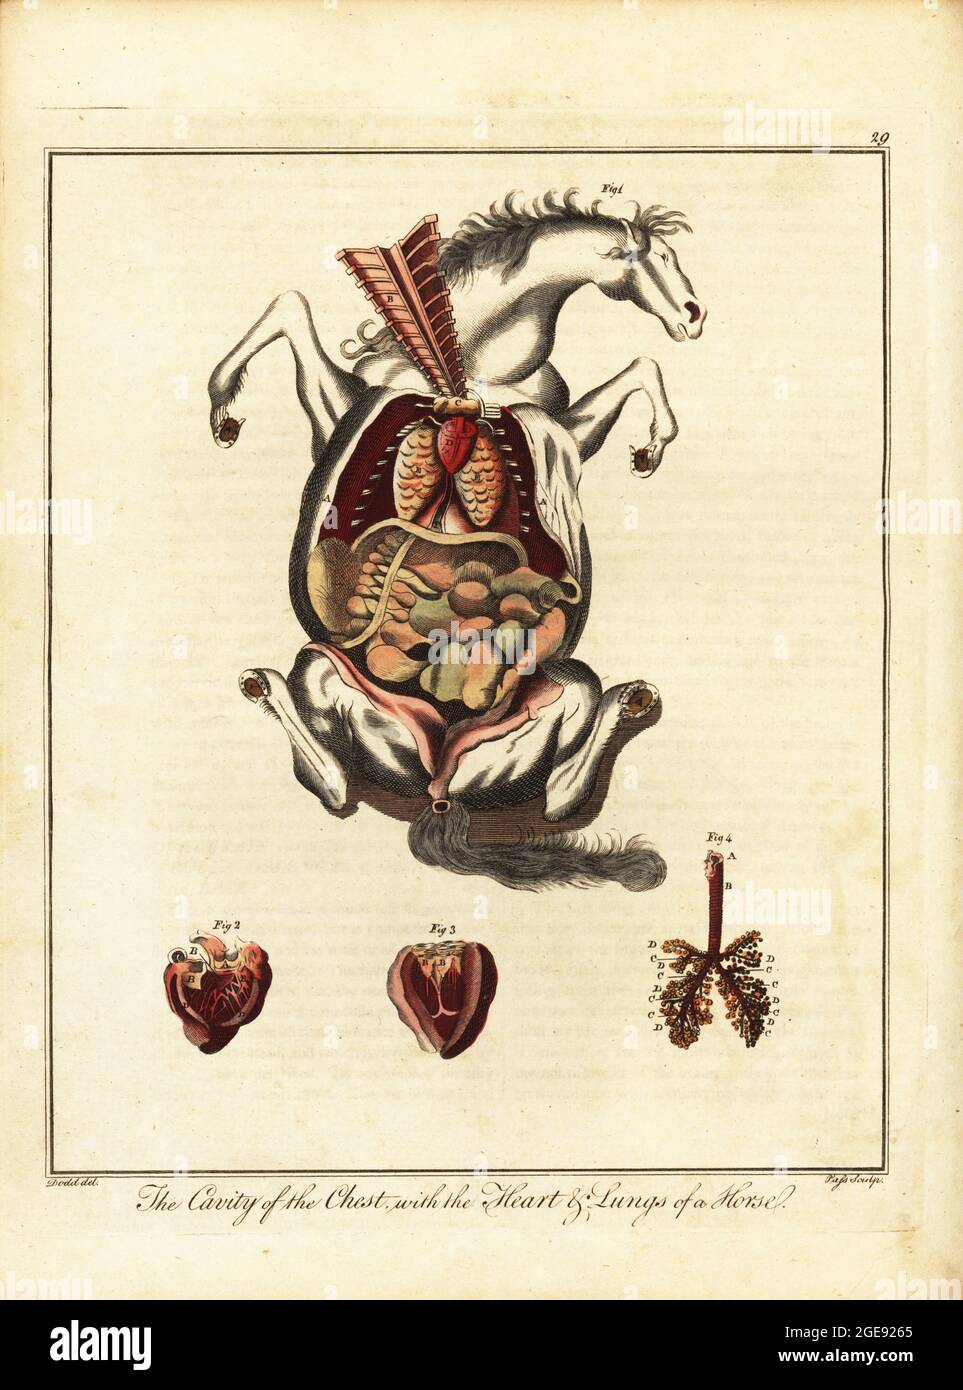 Anatomy of a horse. Chest cavity exposed 1, heart or vena cava 2, left ventricle 3, and lungs 4.. Handcoloured copperplate engraving by J. Pass after an illustration by Daniel Dodd from William Augustus Osbaldiston’s The British Sportsman, or Nobleman, Gentleman and Farmer’s Dictionary of Recreation and Amusement, J. Stead, London, 1792. Stock Photo